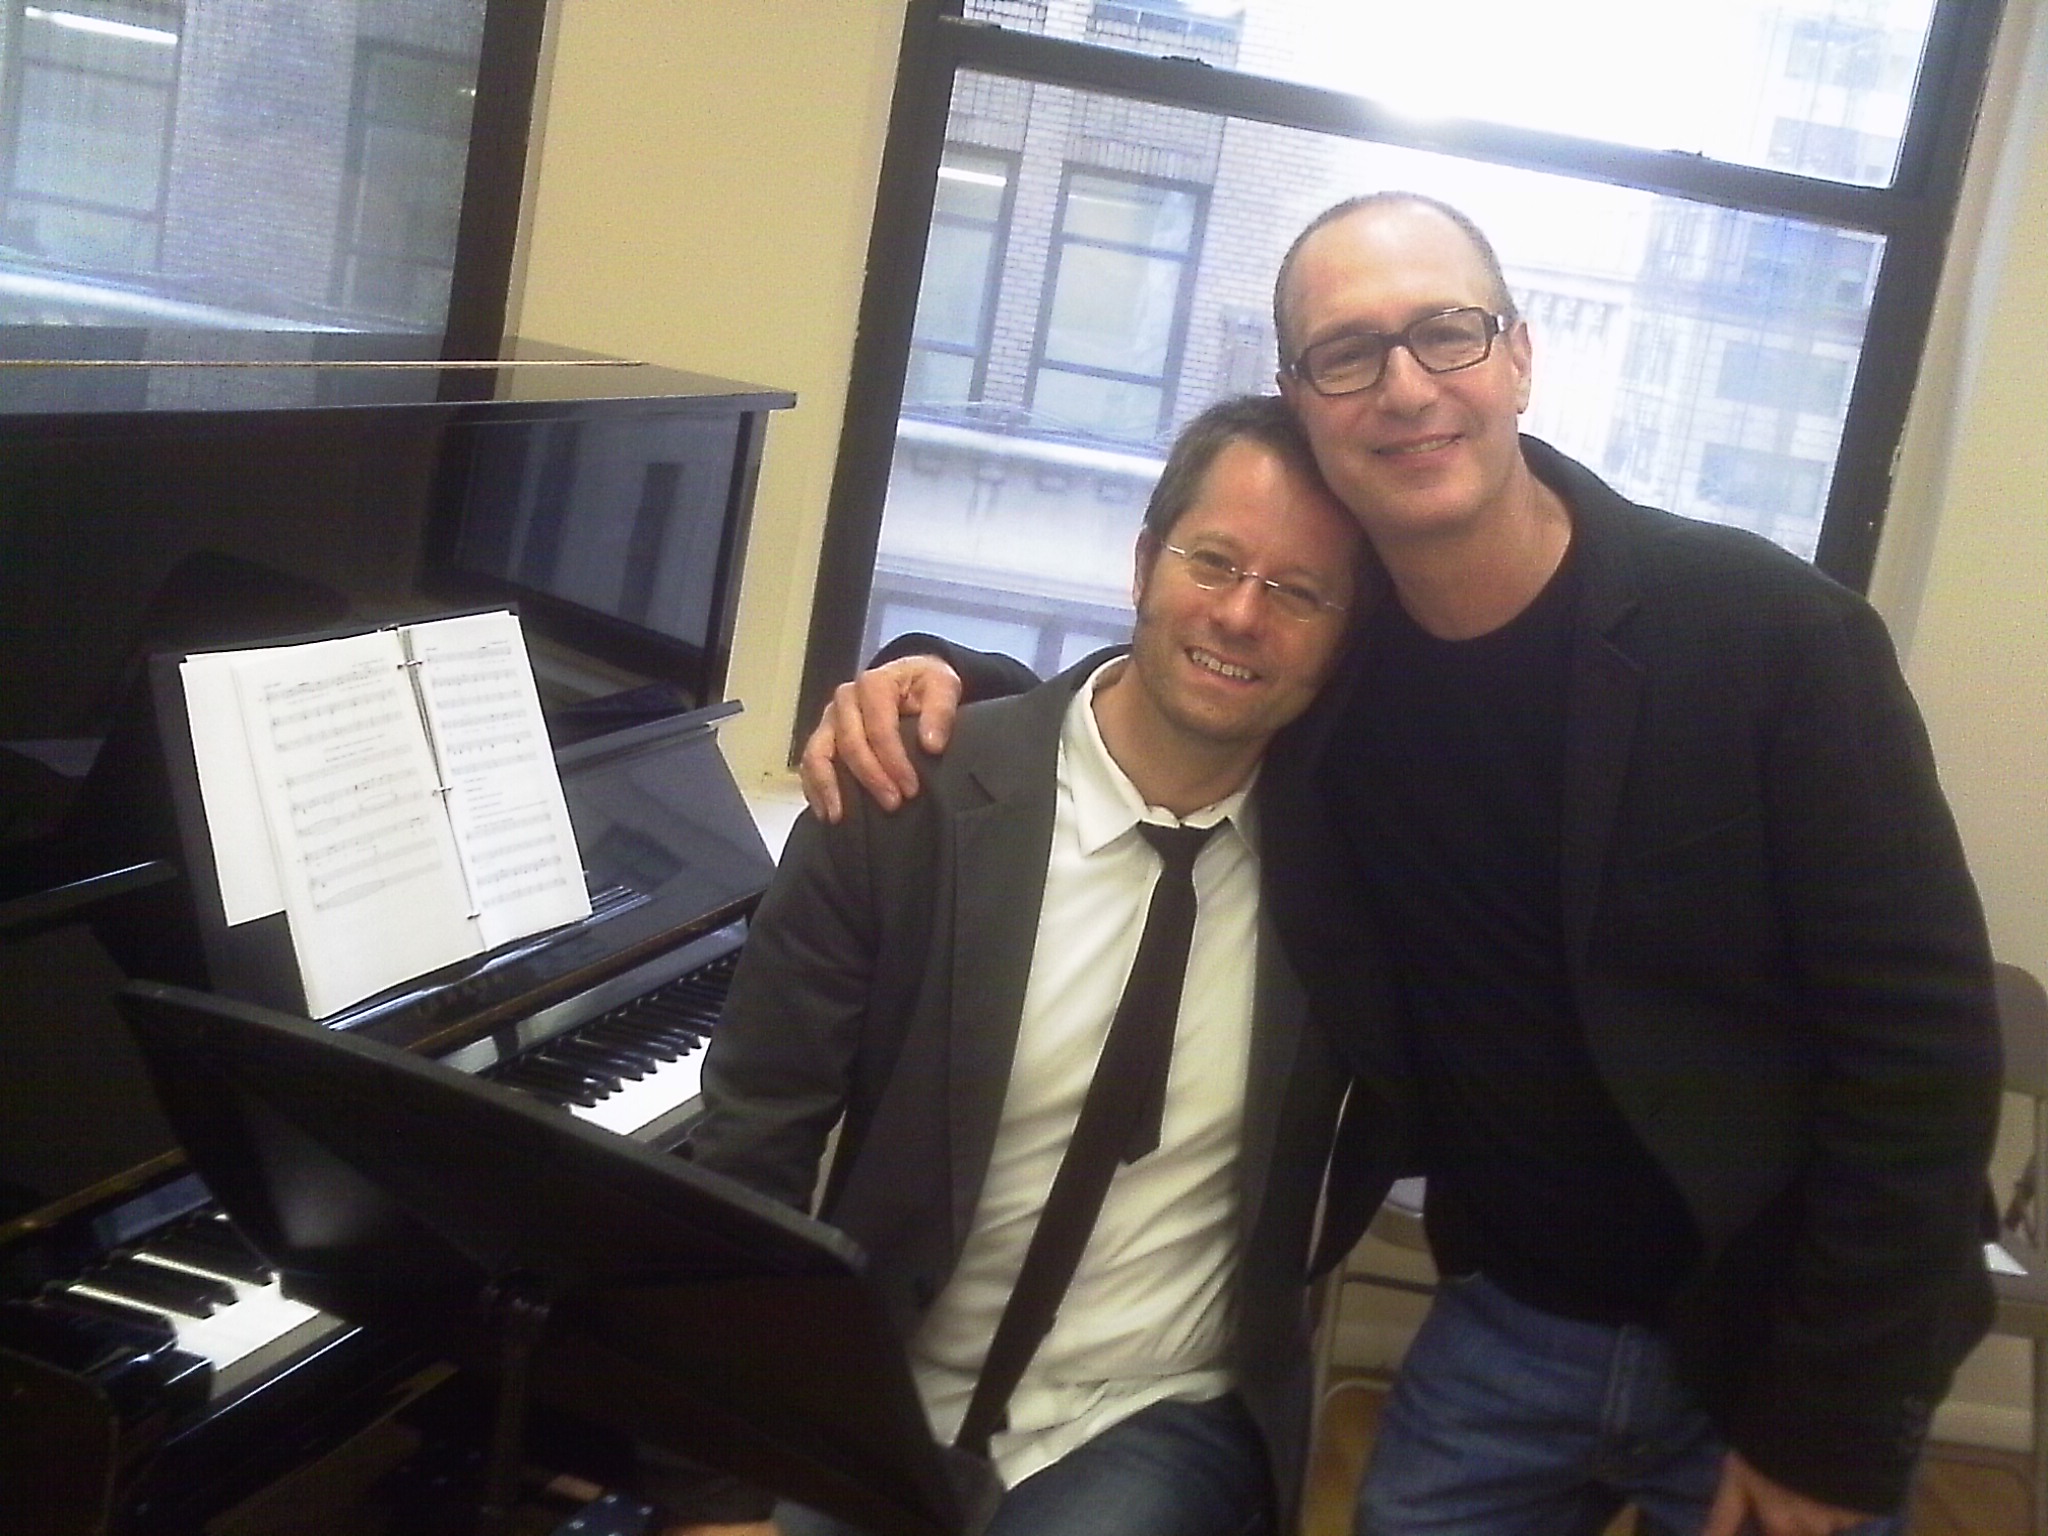 Musical Director Fred Lassen with Dan at the Marry Harry reading, NYC 2011